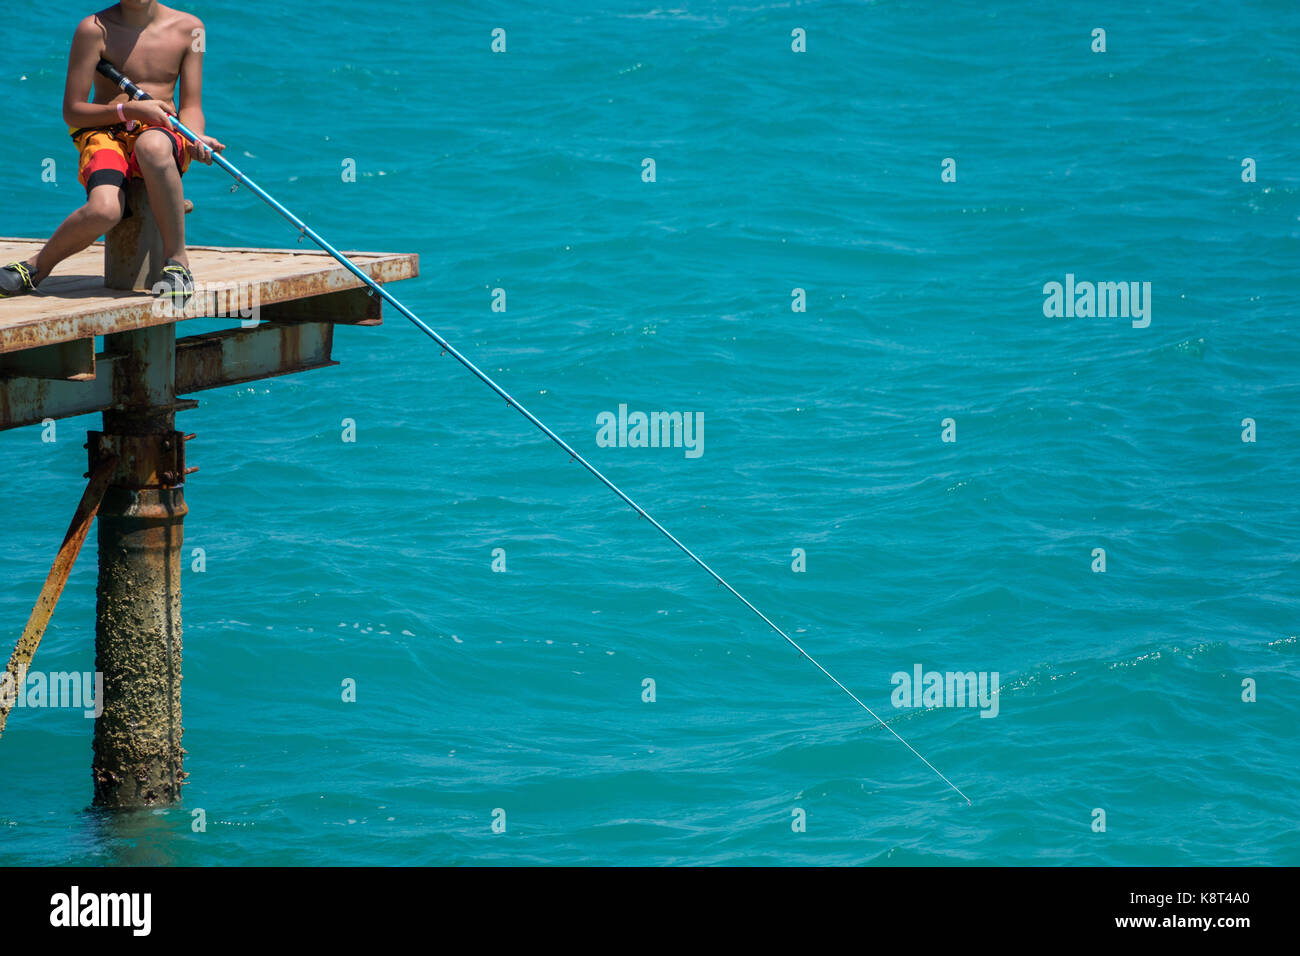 https://c8.alamy.com/comp/K8T4A0/children-are-fishing-on-the-pier-close-up-of-hands-and-rods-K8T4A0.jpg